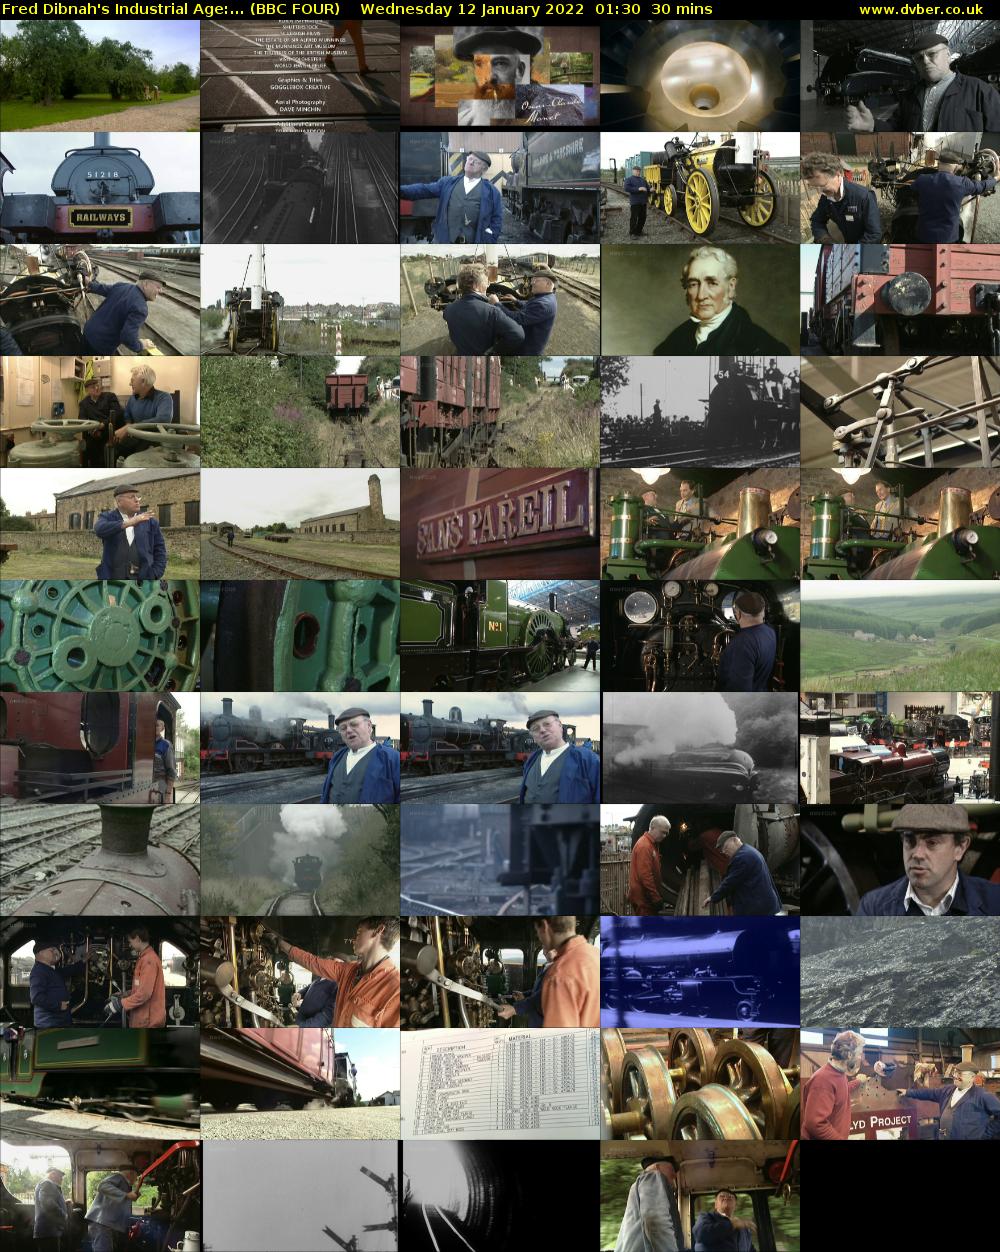 Fred Dibnah's Industrial Age:... (BBC FOUR) Wednesday 12 January 2022 01:30 - 02:00